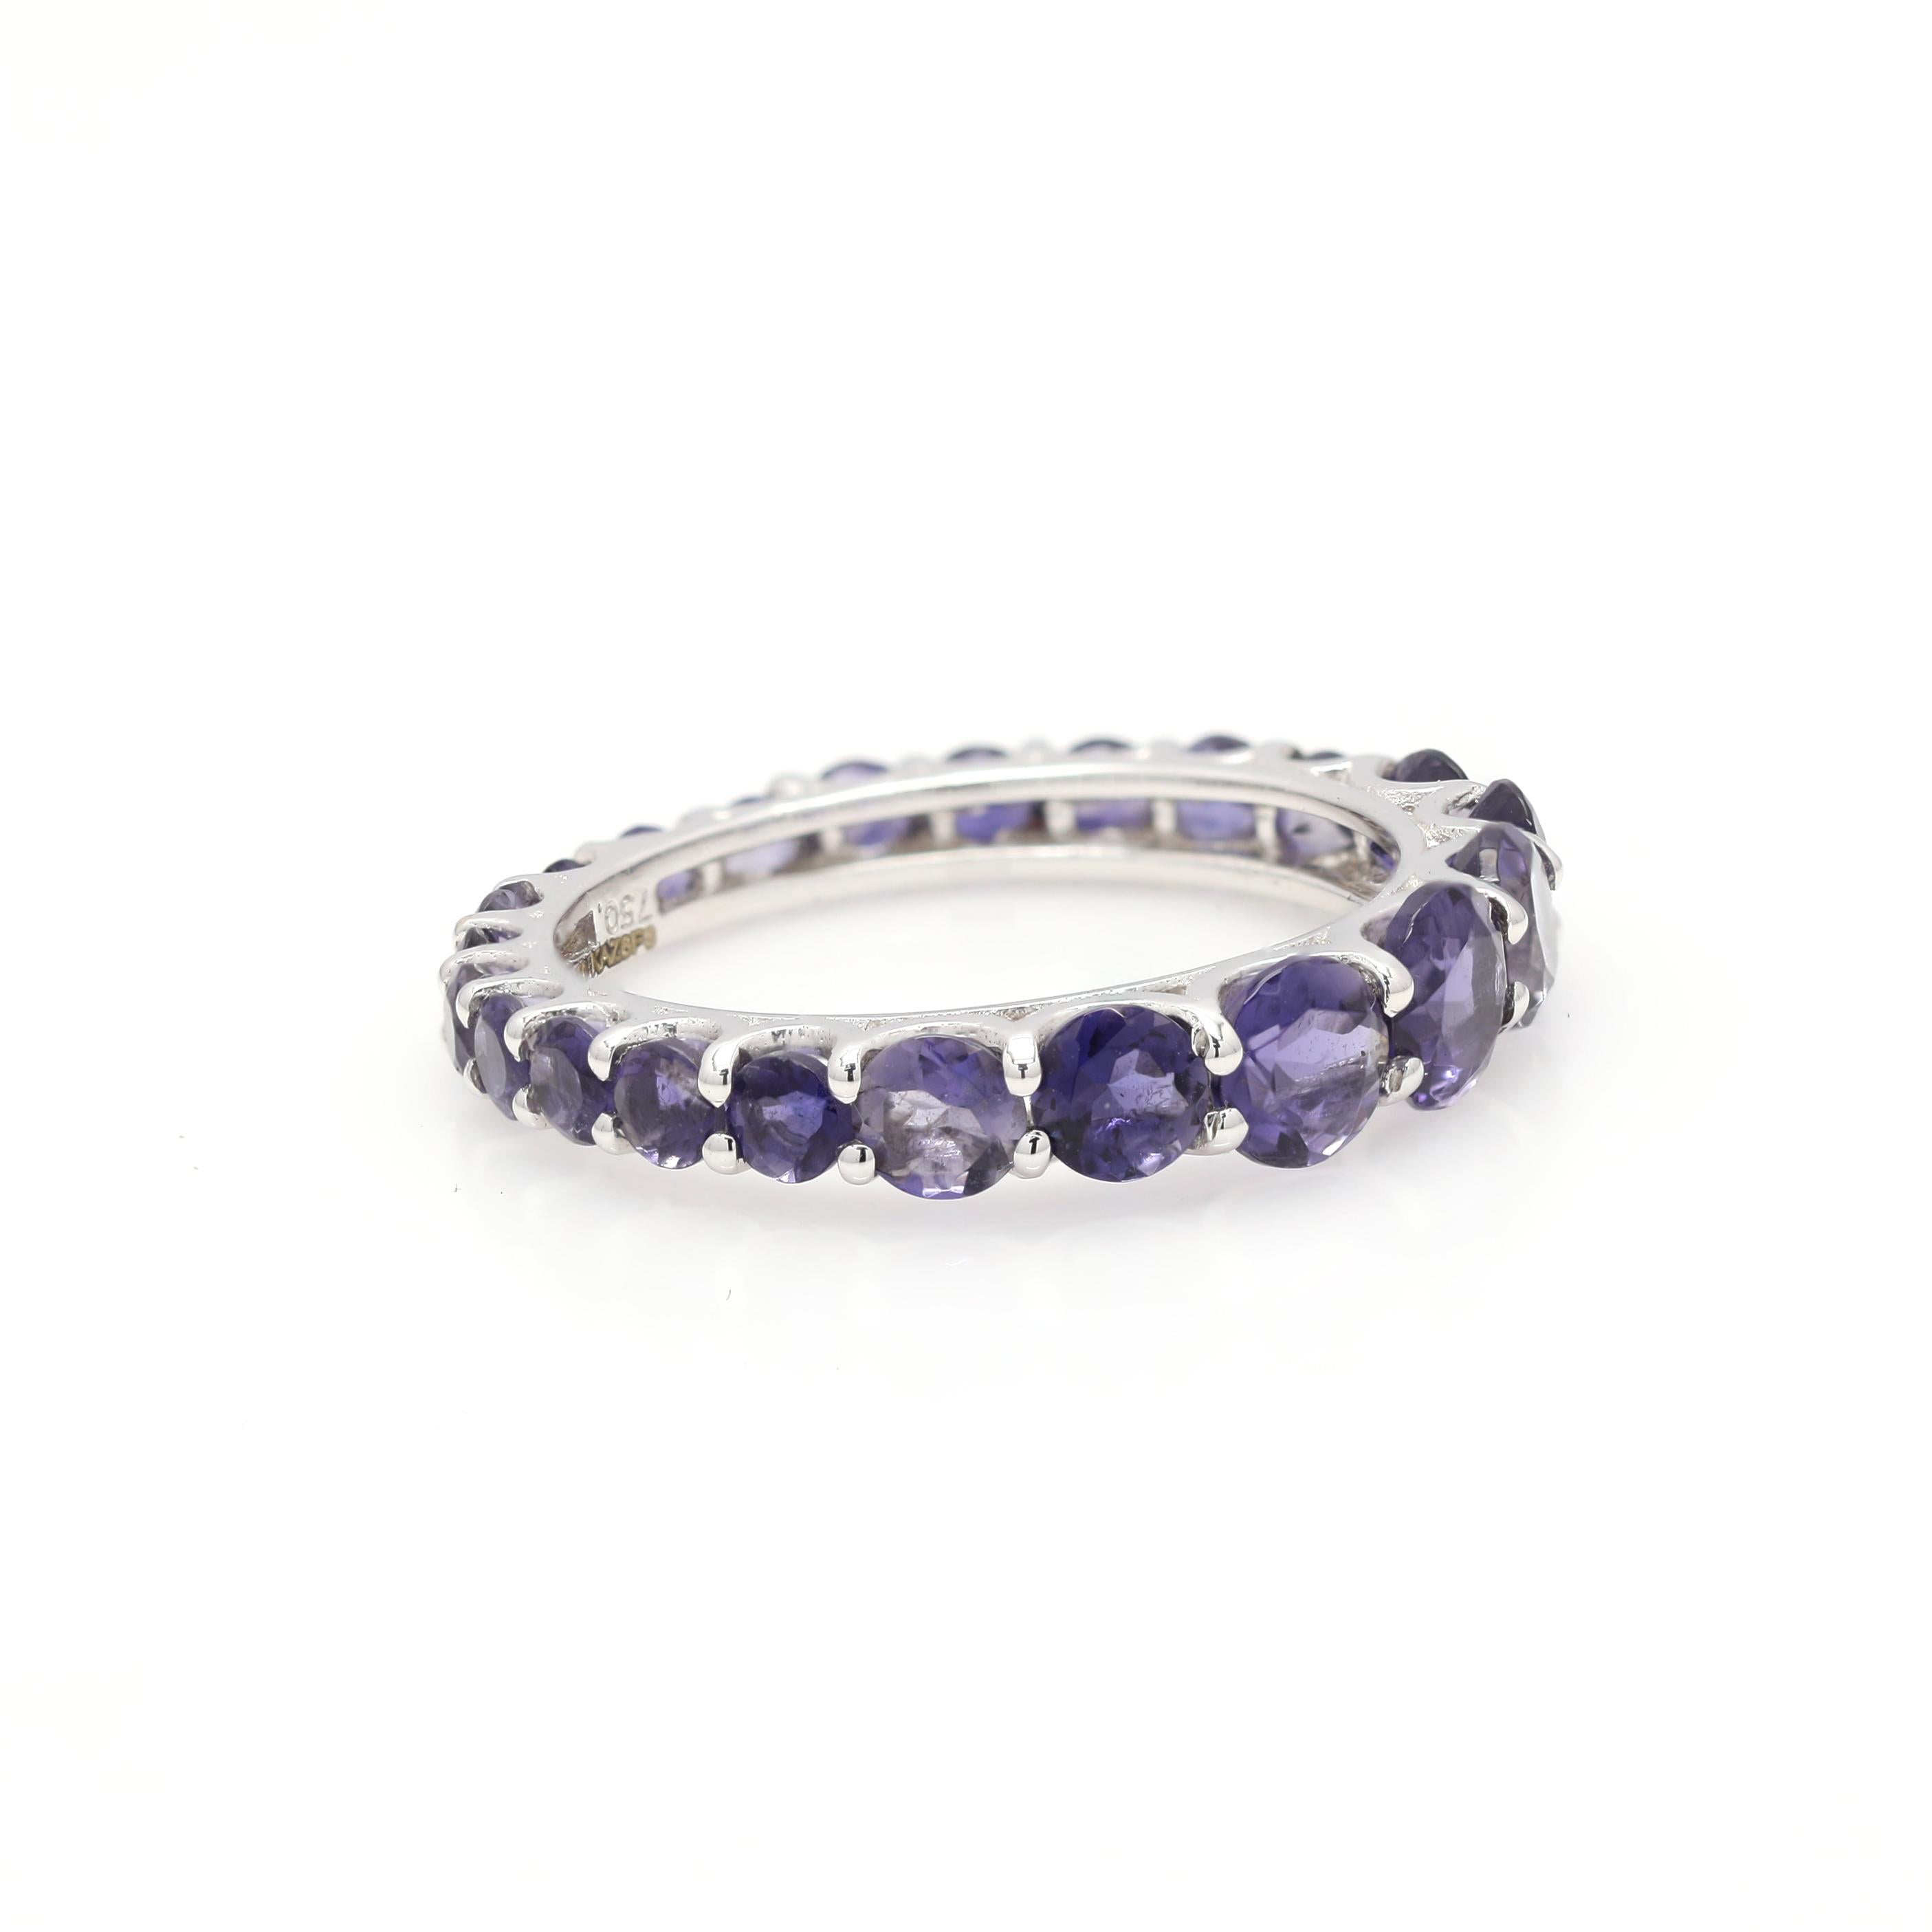 For Sale:  Stackable Eternity 2.27ct Iolite Gemstone Band Ring in 18k White Gold Settings 2